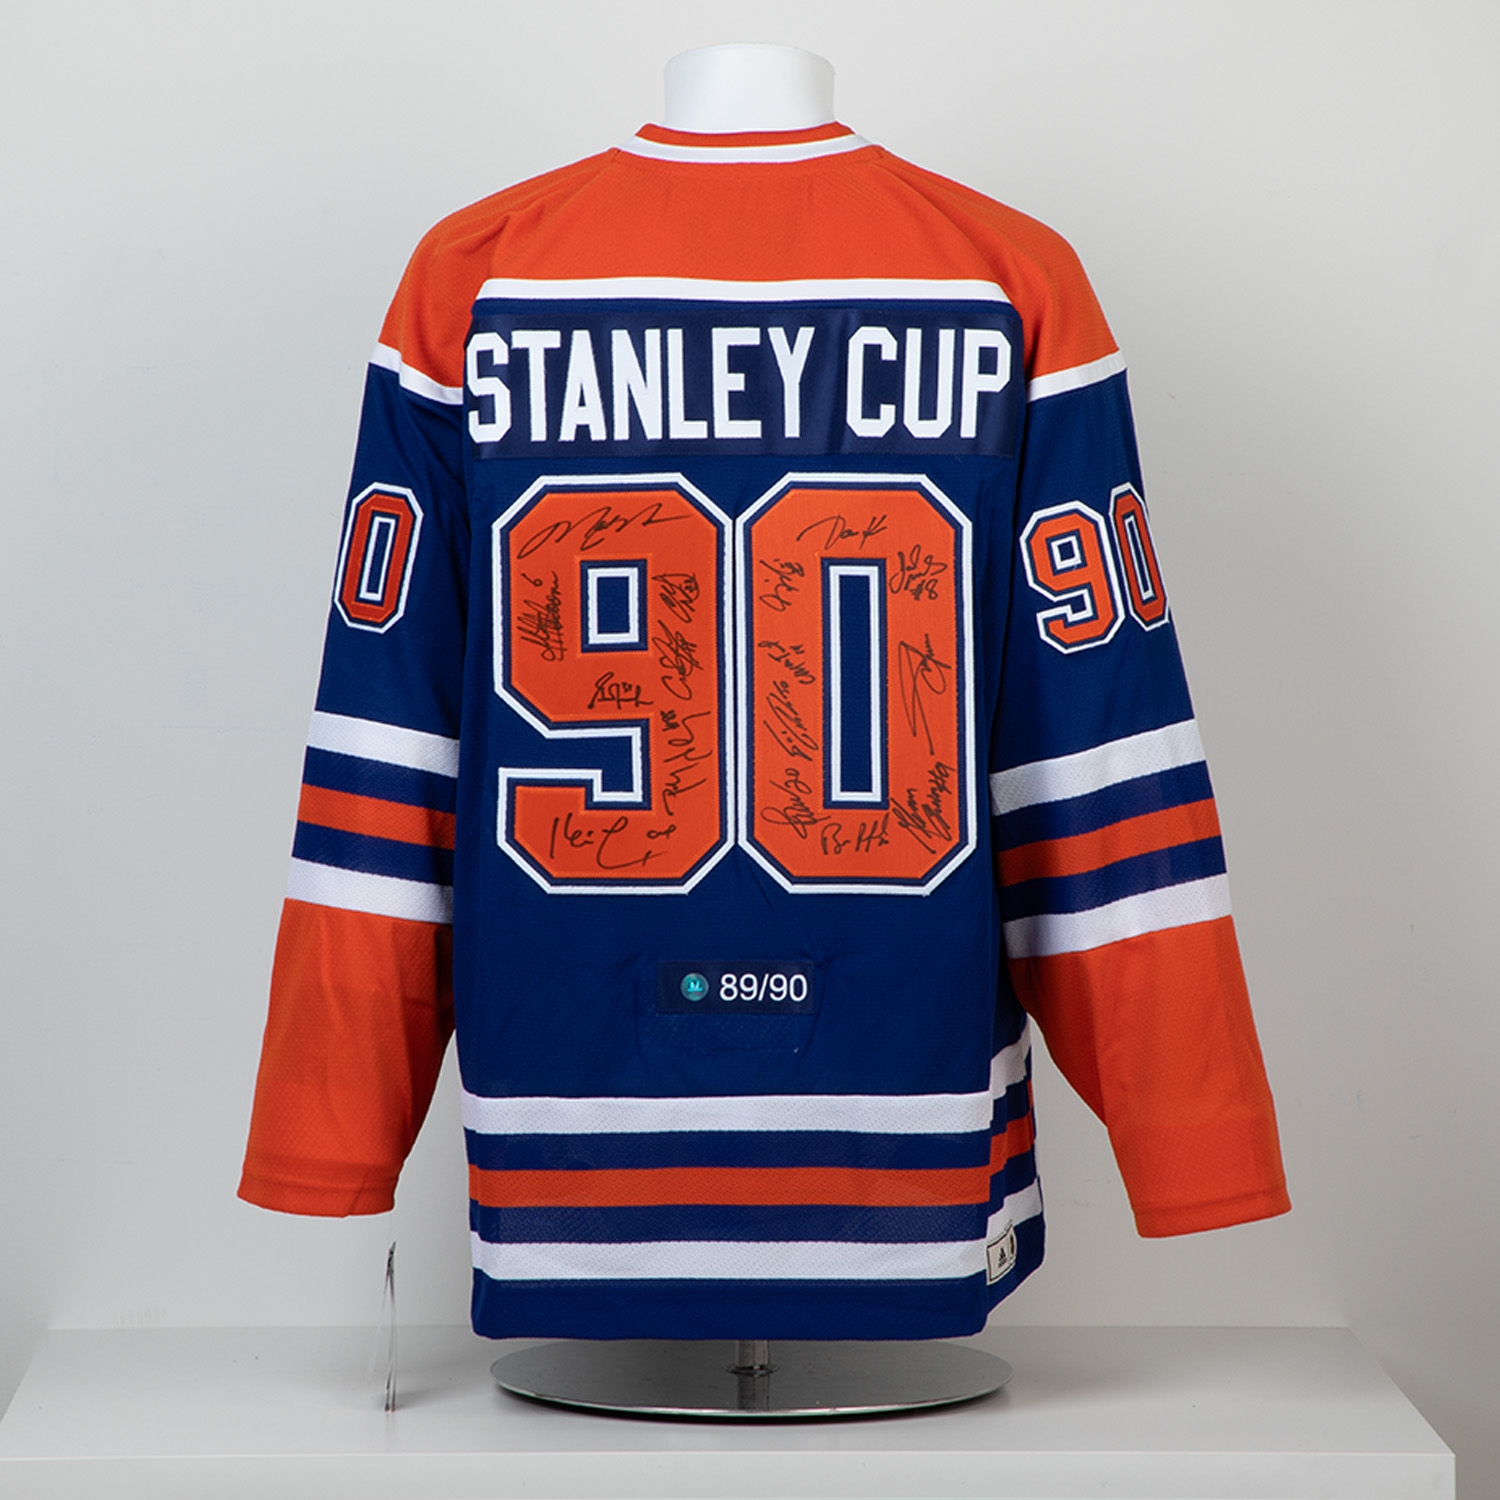 1990 Edmonton Oilers 16 Player Team Signed Stanley Cup Vintage Jersey #89/90